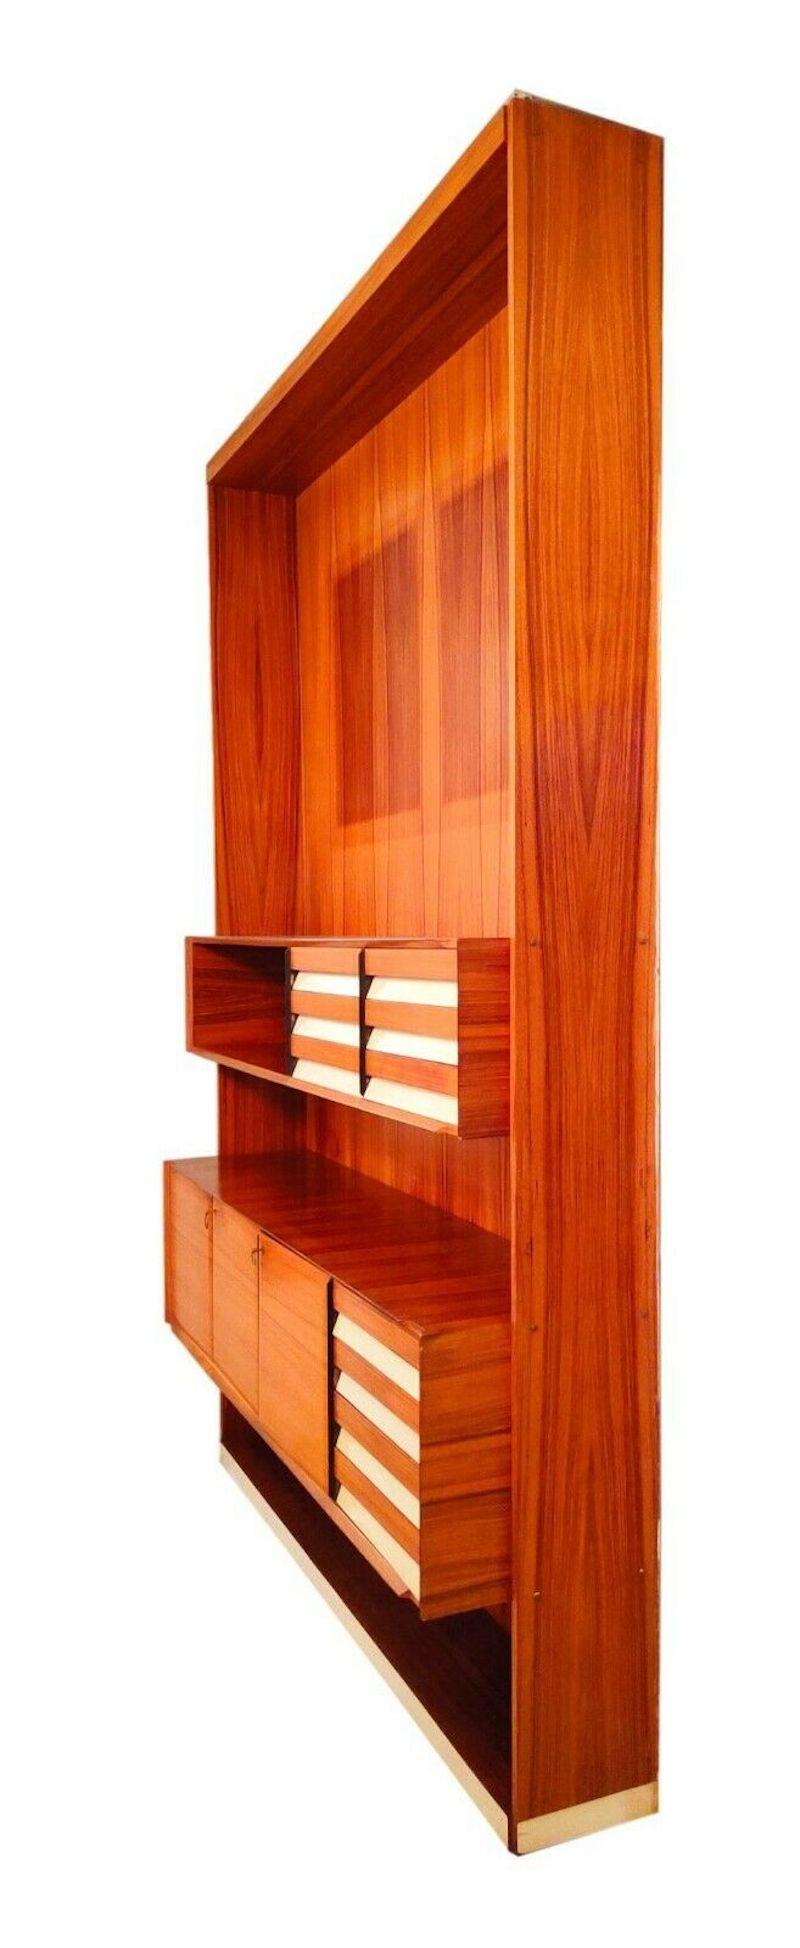 Splendid sky / earth design bookcase attributed to osvaldo borsani or vittorio dassi, composed of two closed elements, various open shelves, 10 drawers

Shoulder to boiserie over the entire surface

Measure mt. 3.15 in height, mt. 1.95 wide and